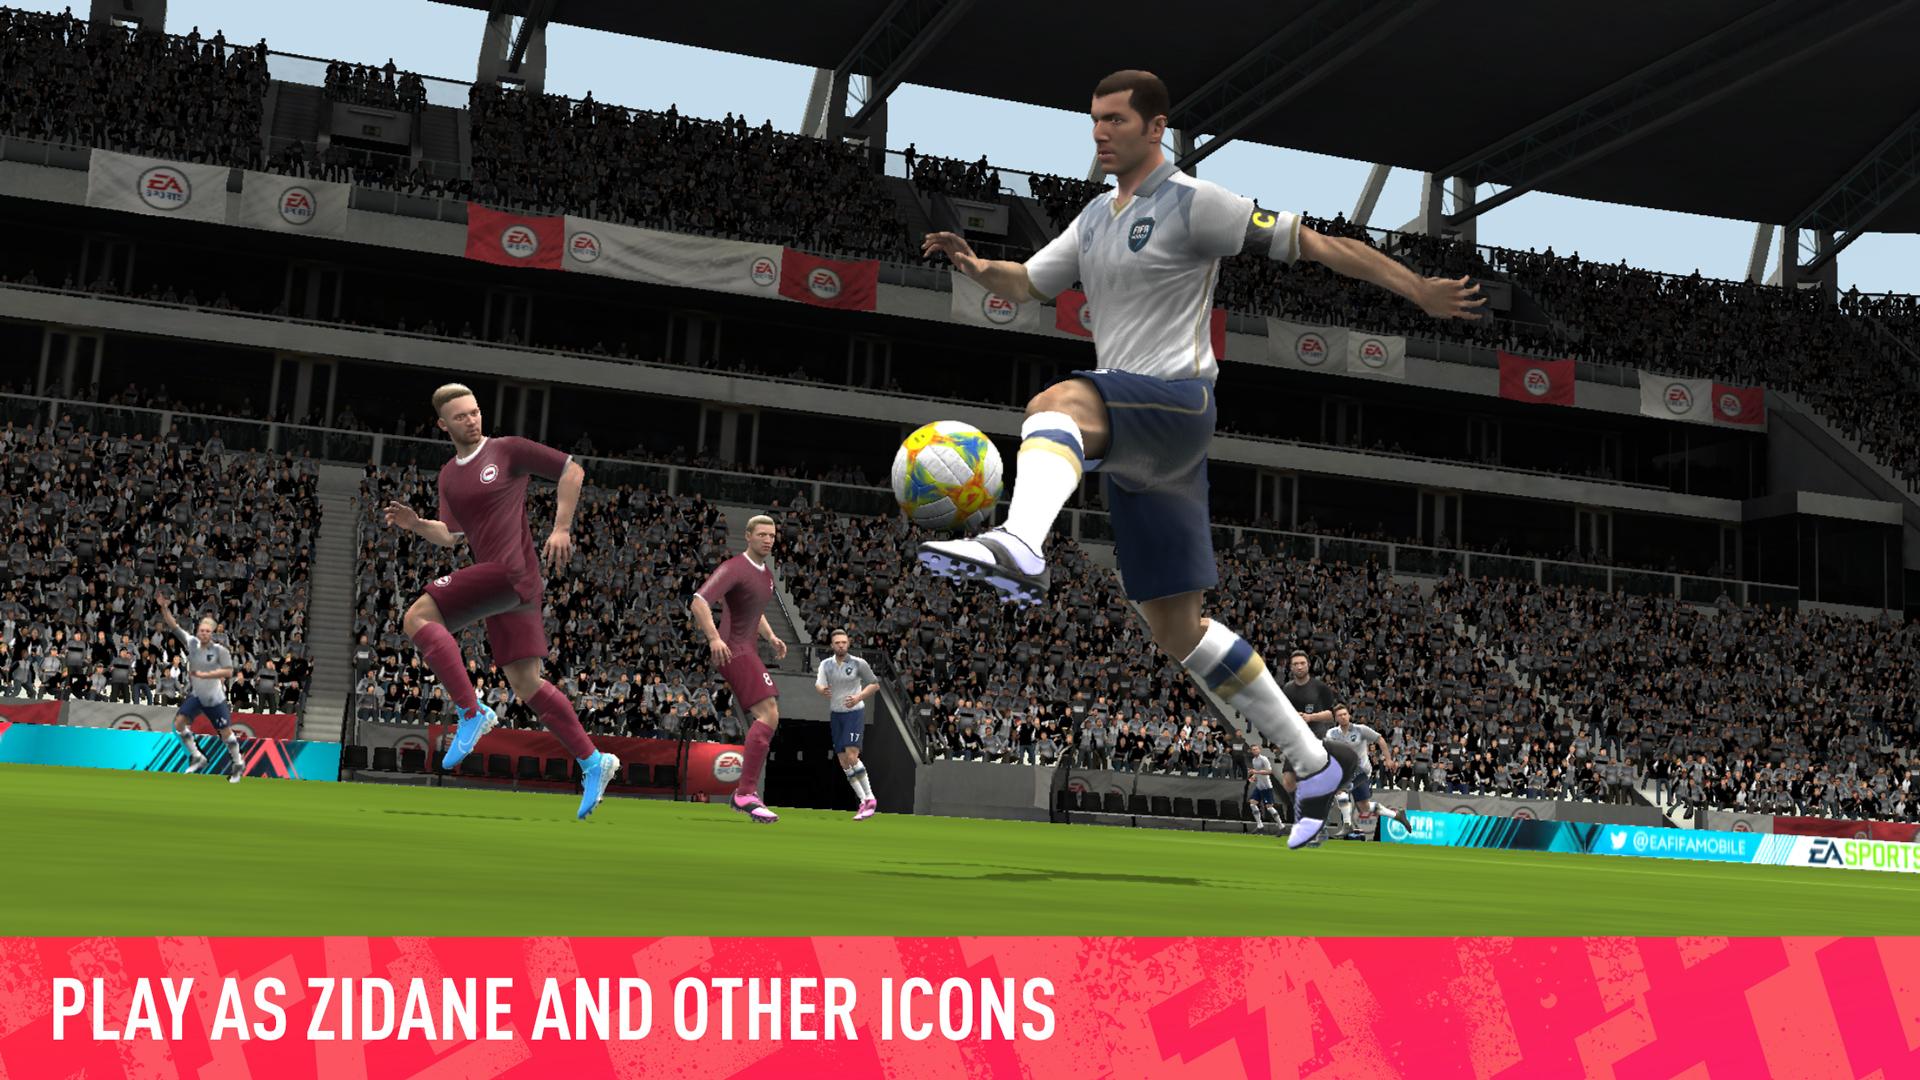 Best Games Android - FIFA Mobile Soccer (v 5.1.1) After FIFA 15, FIFA 16  and FIFA 17, EA Sports developed a new Soccer game- FIFA Mobile Soccer. You  can build and manage